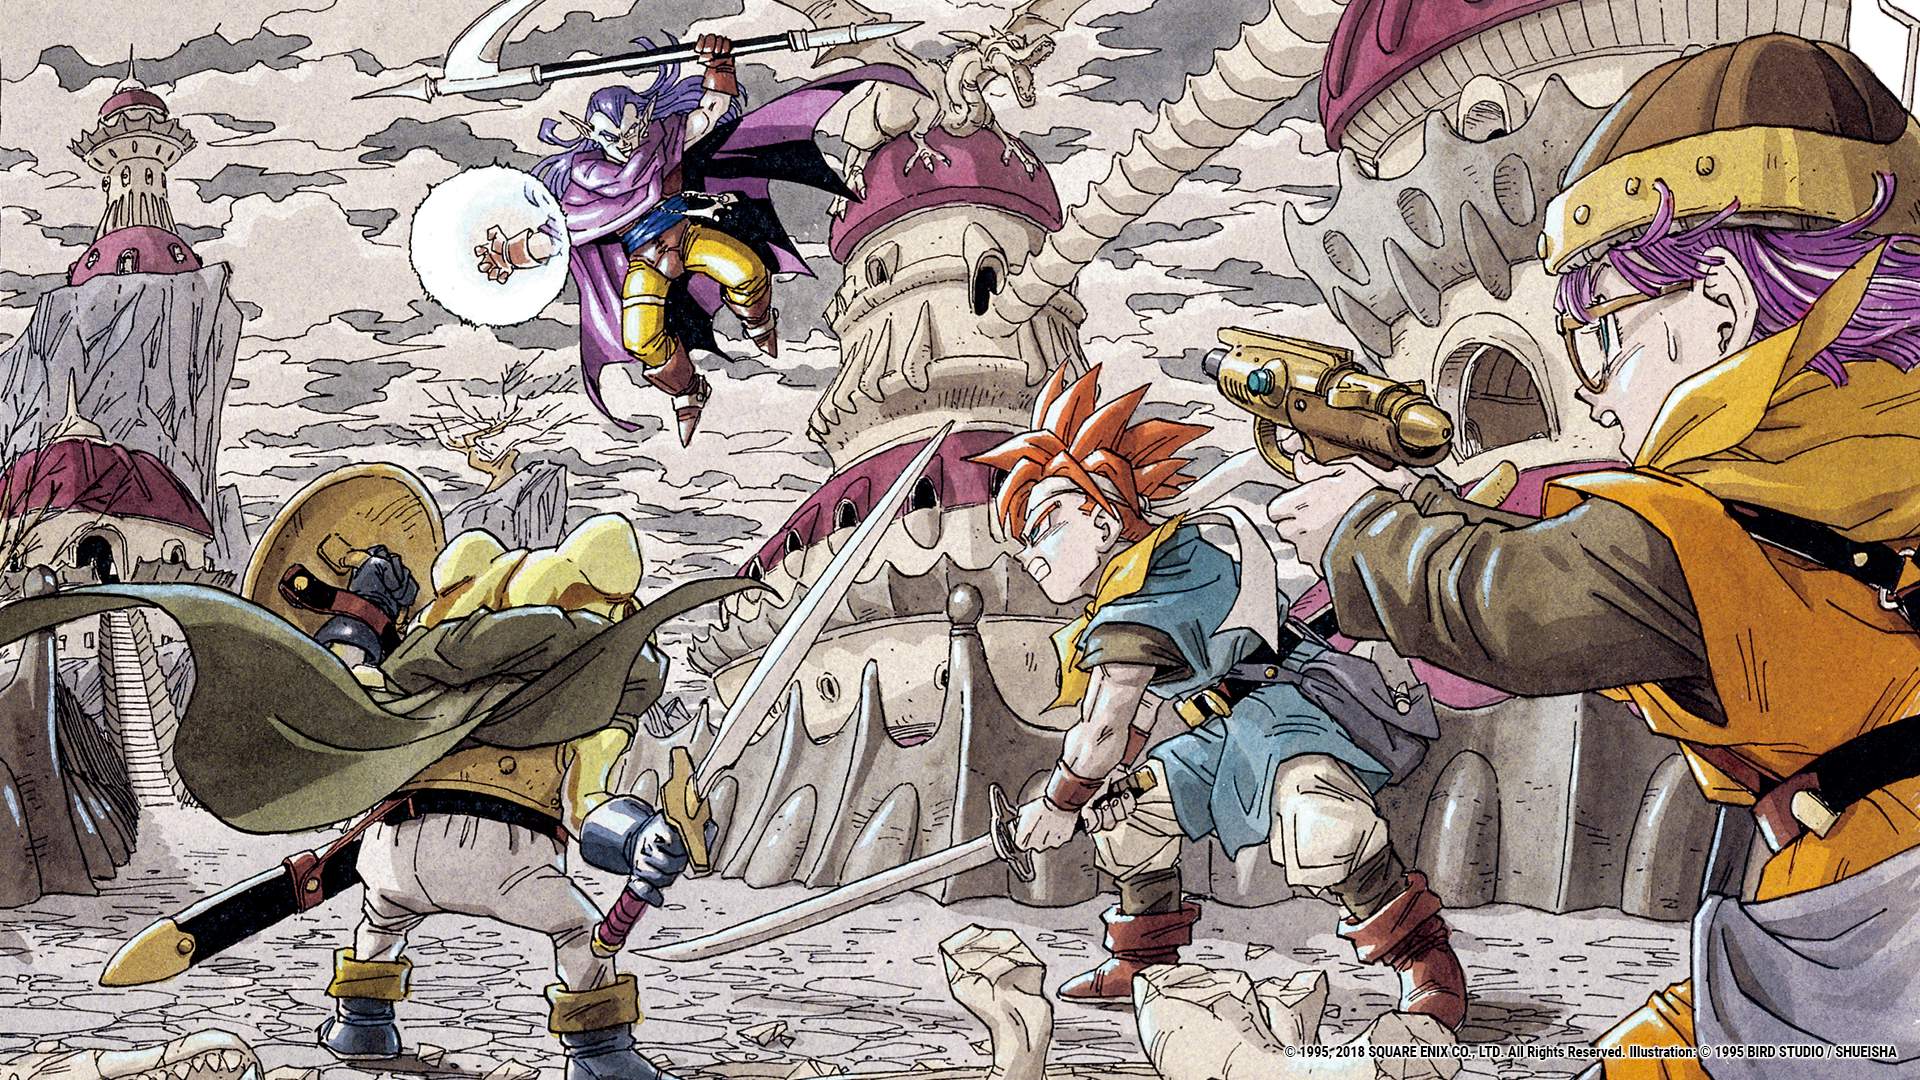 Will Chrono Trigger come to Switch?